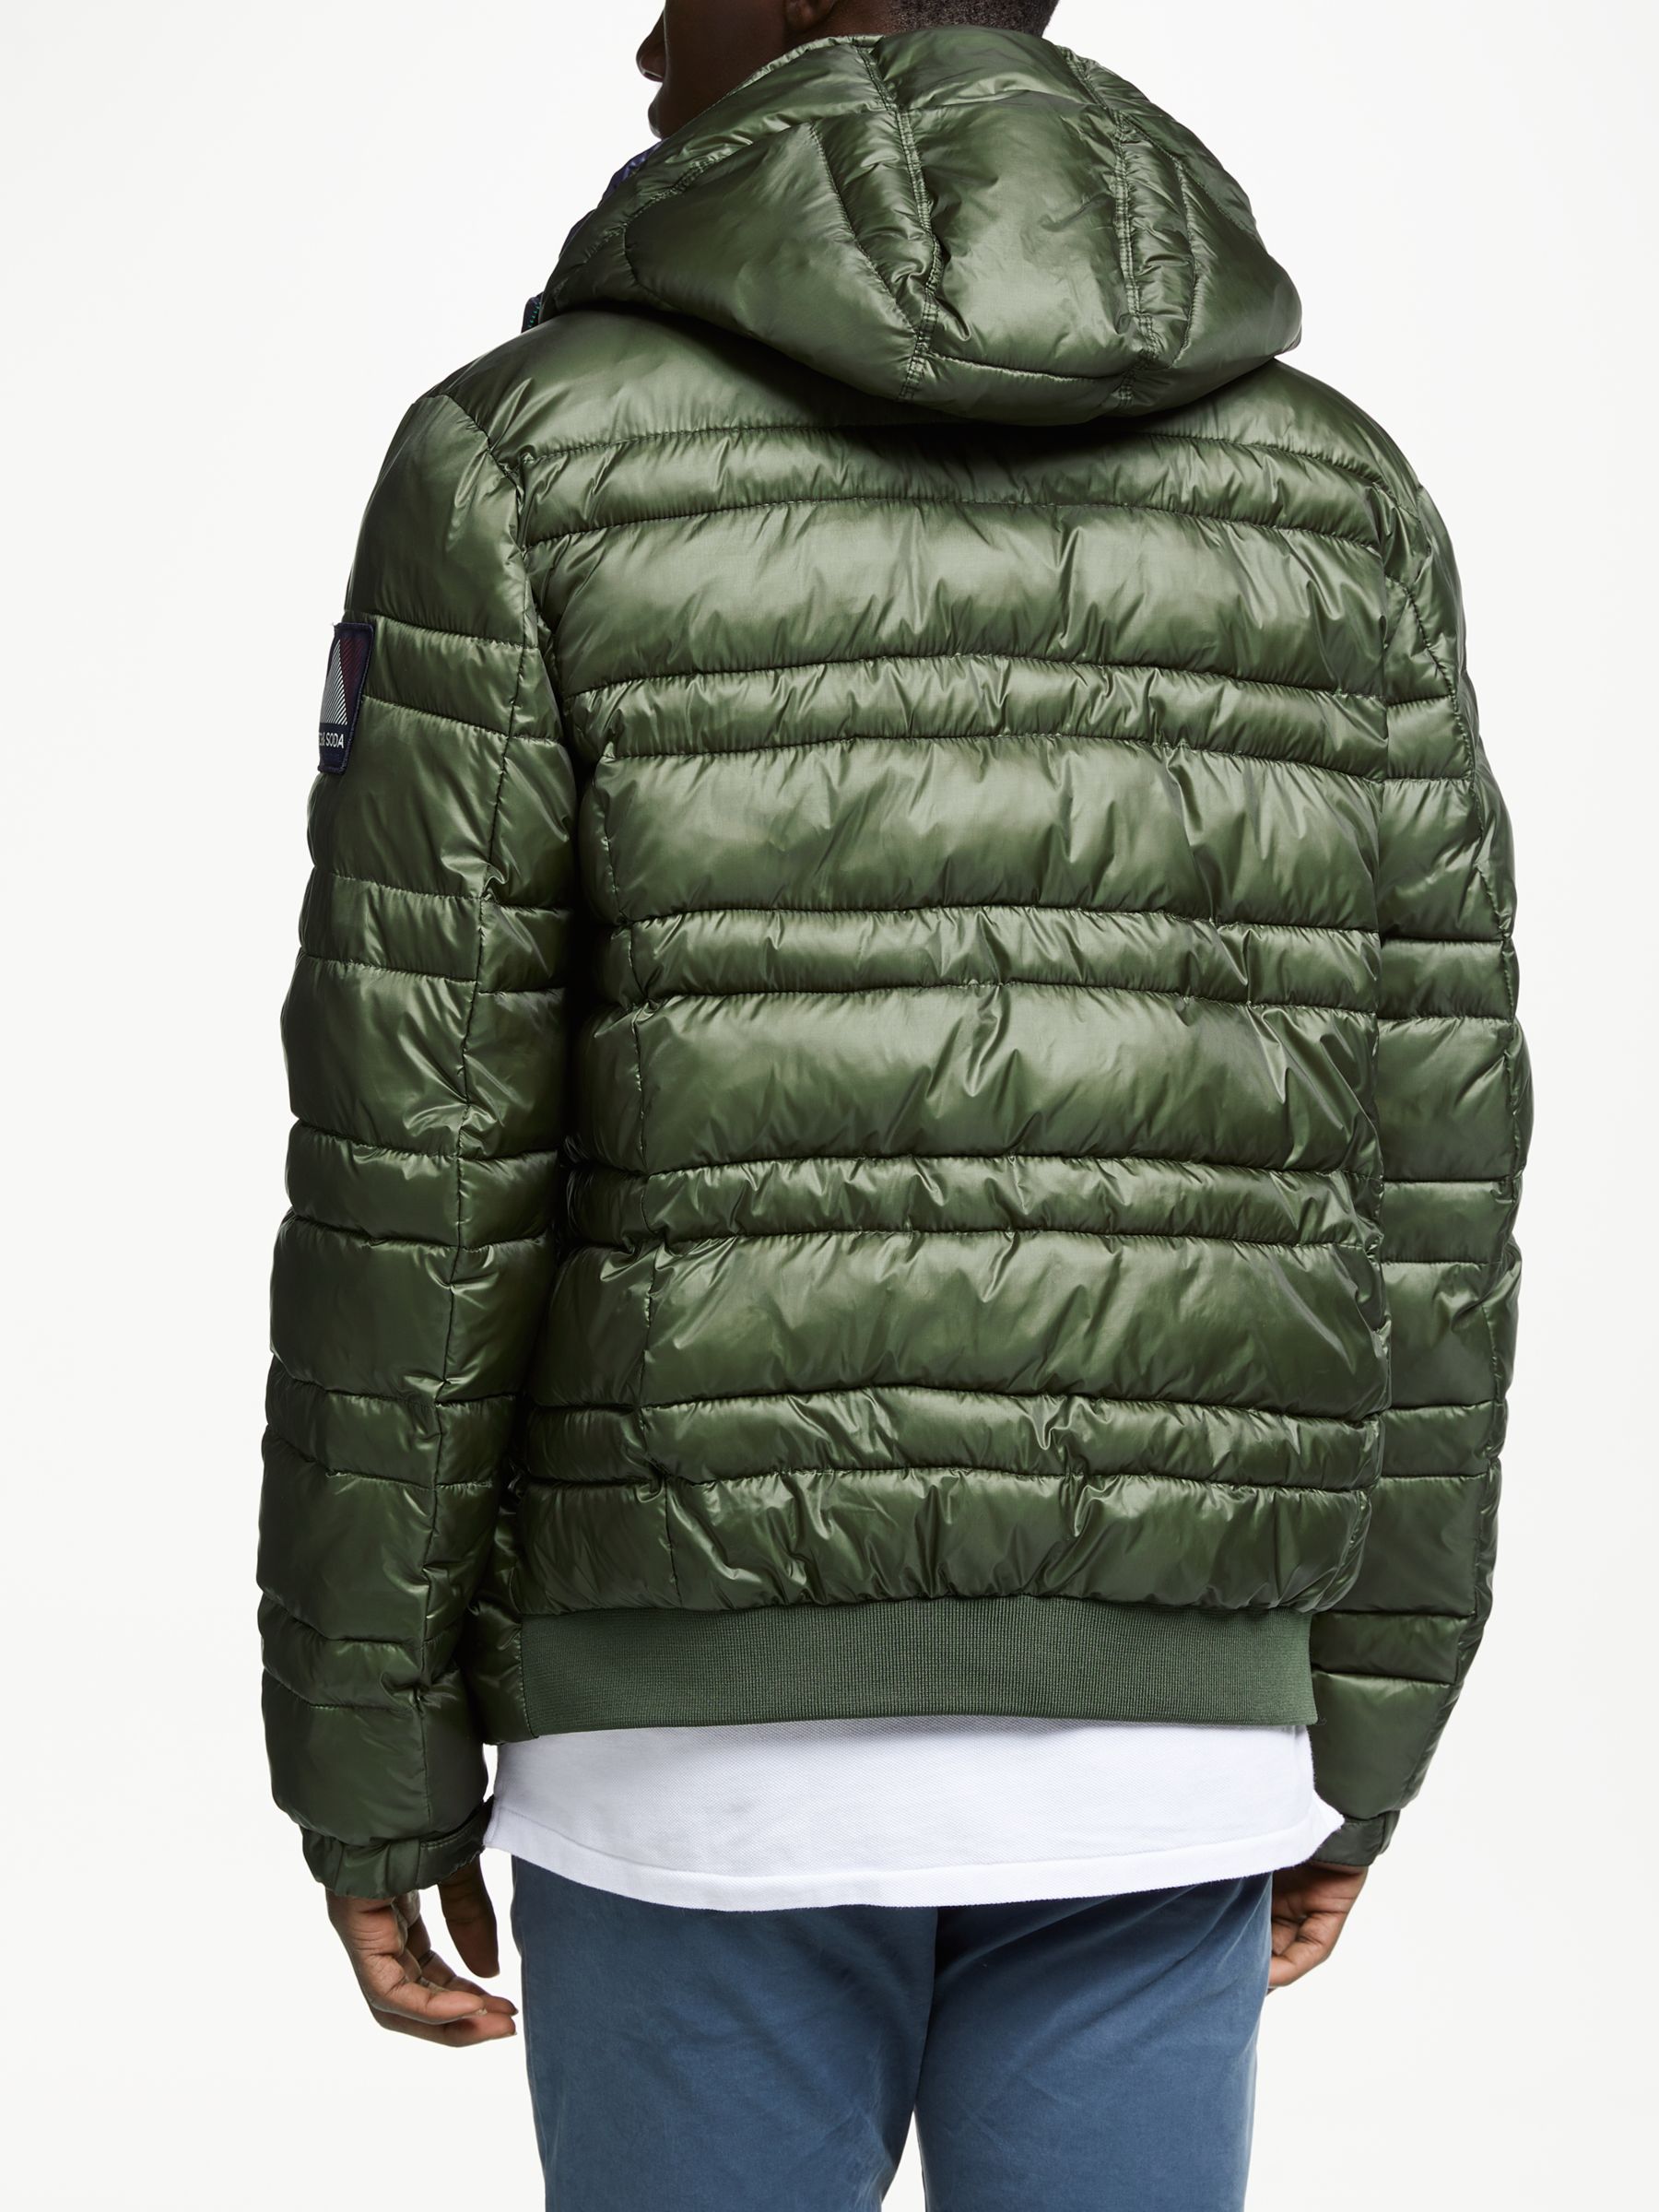 Scotch & Soda Classic Hooded Down Jacket, Army at John Lewis & Partners